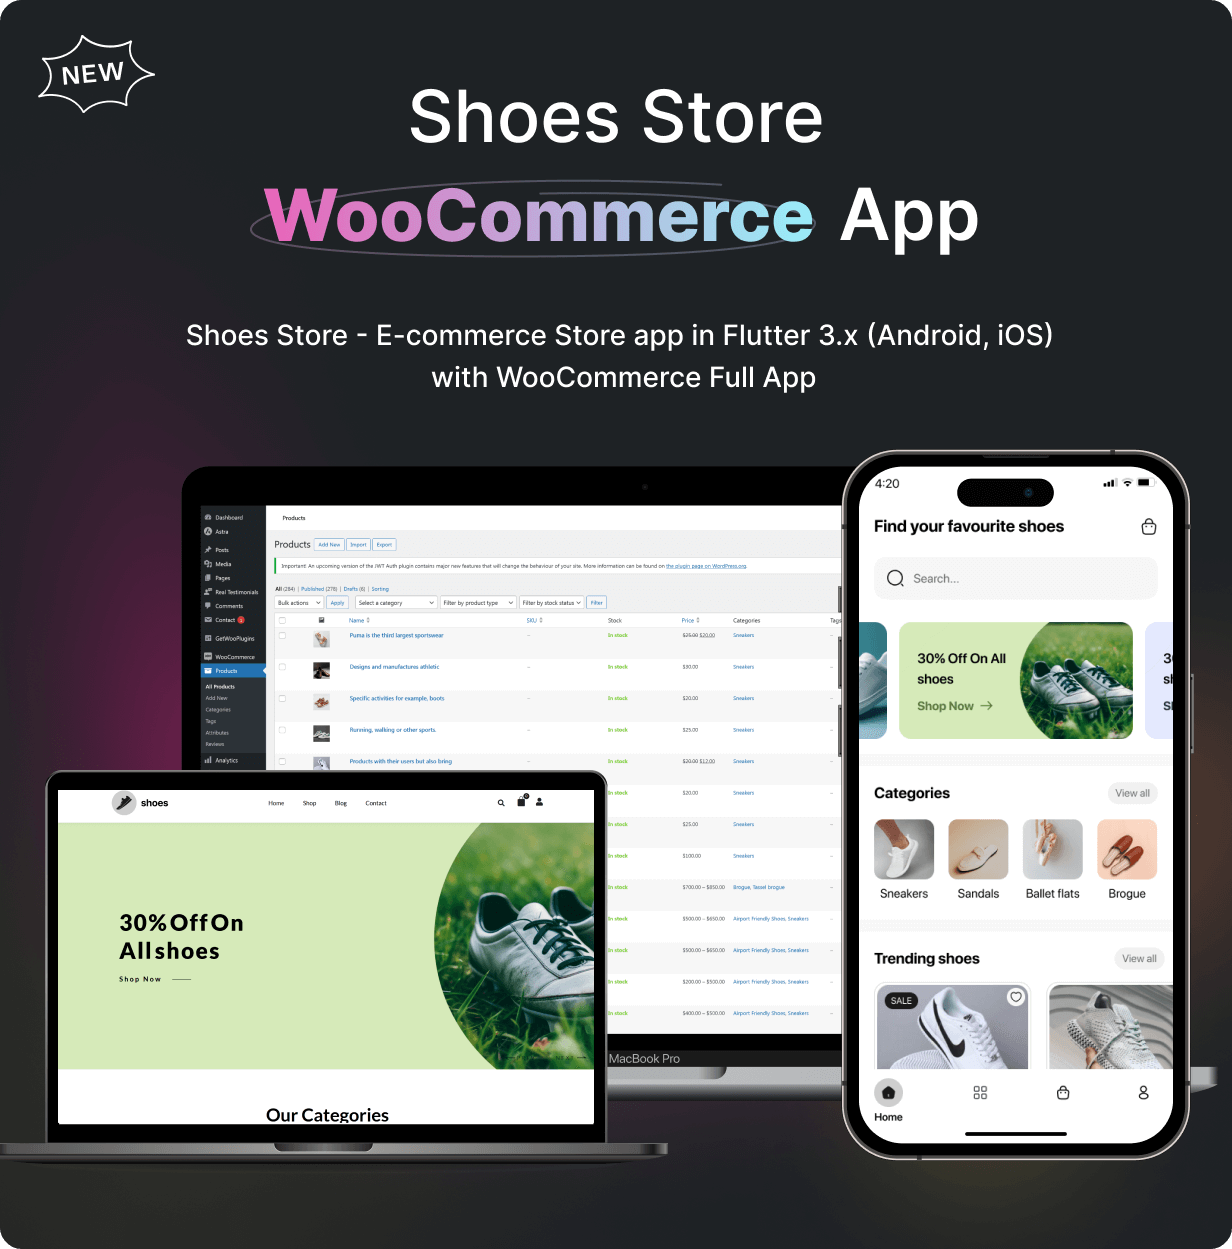 Shoes Store App - E-commerce Store app in Flutter 3.x (Android, iOS) with WooCommerce Full App - 5